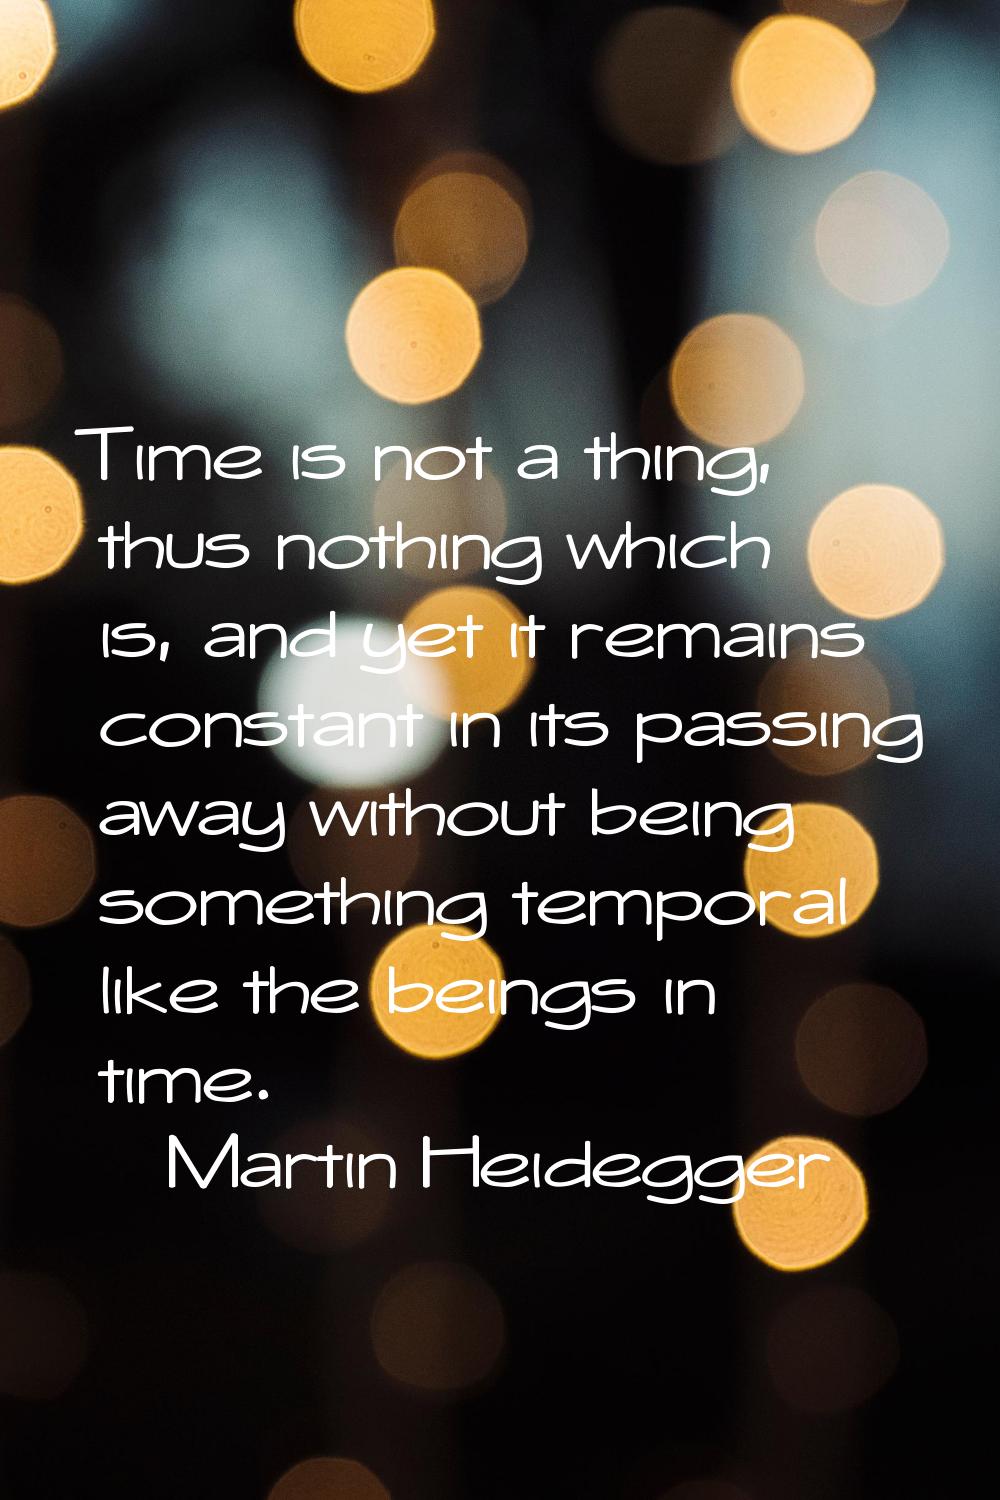 Time is not a thing, thus nothing which is, and yet it remains constant in its passing away without